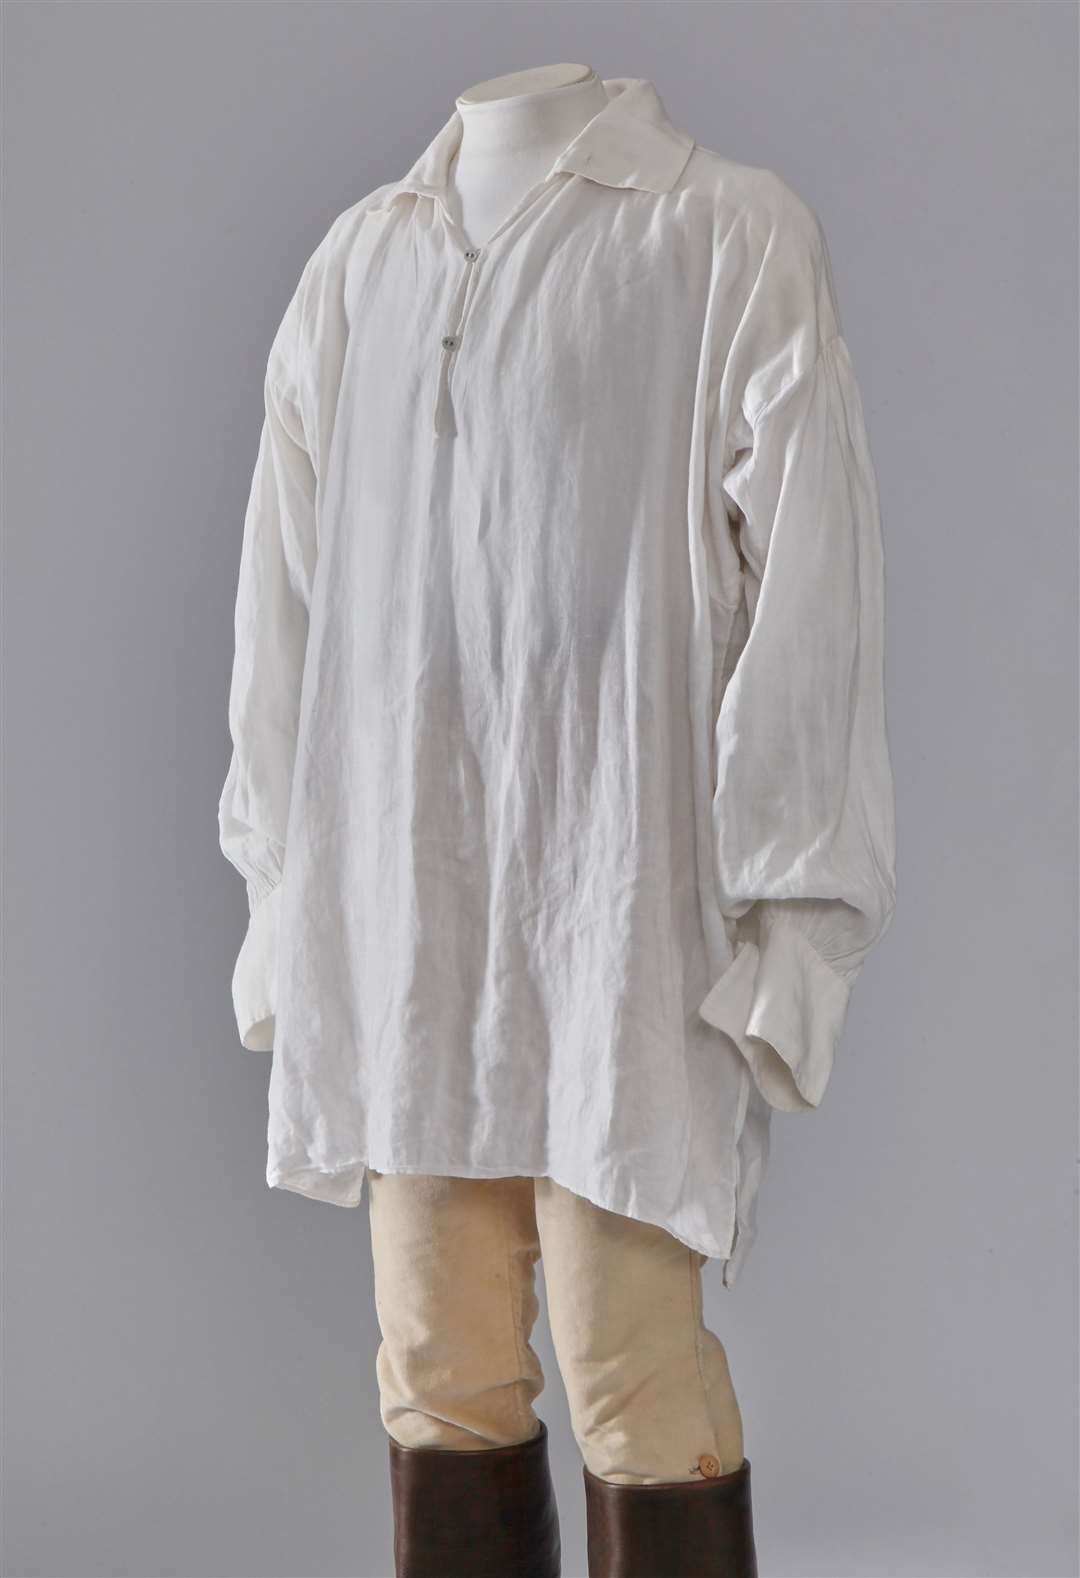 The shirt worn by Colin Firth in Pride And Prejudice (Cosprop/Kerry Taylor Auctions/PA)